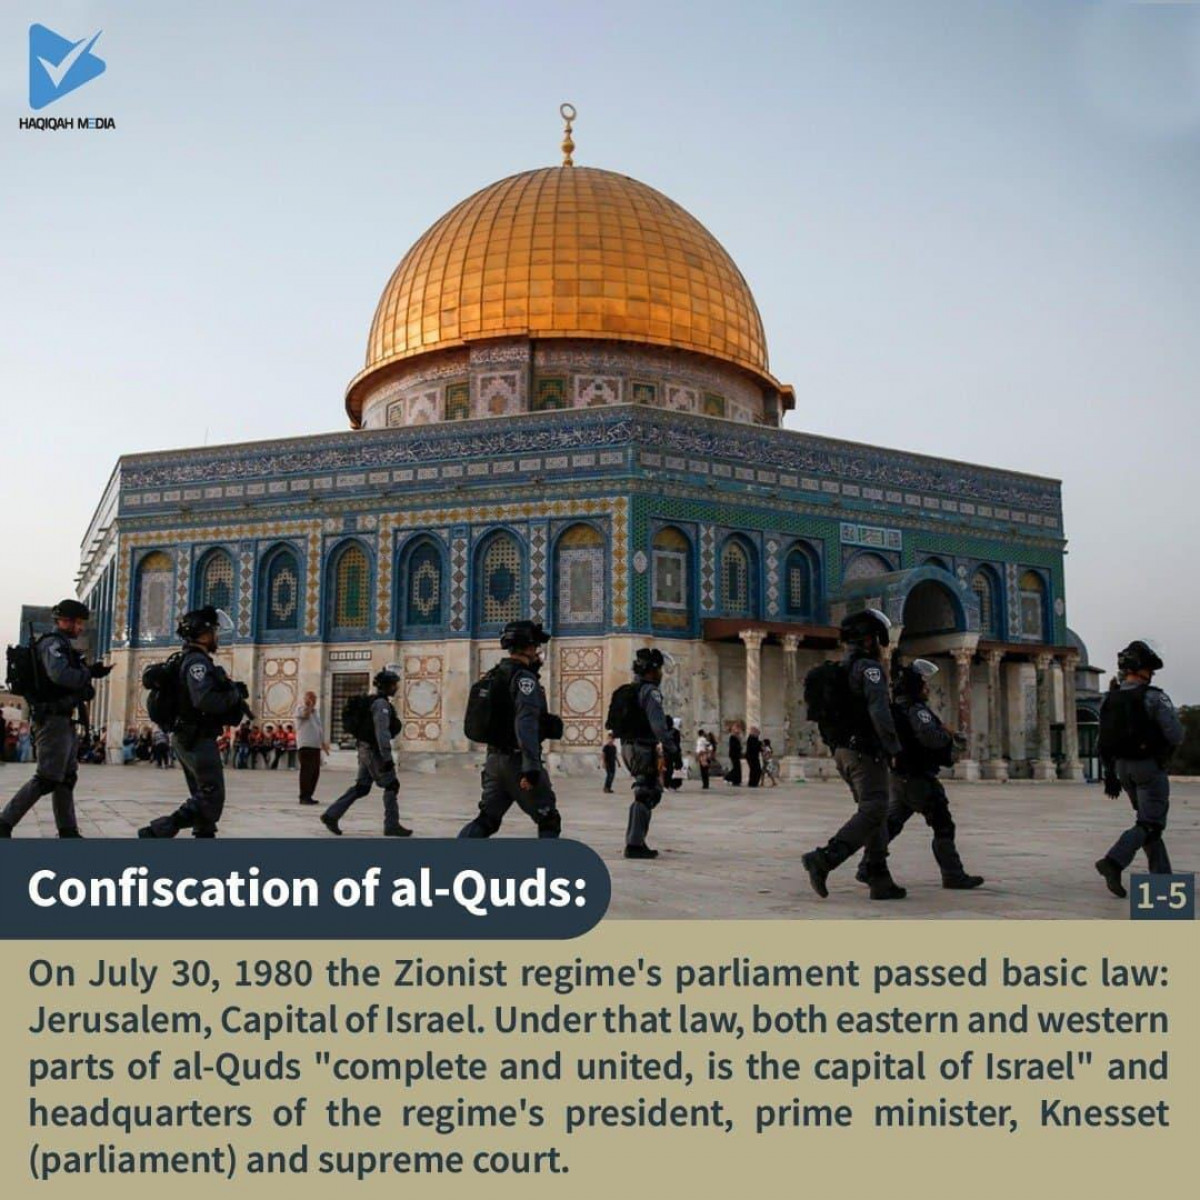 Confiscation of al-Quds